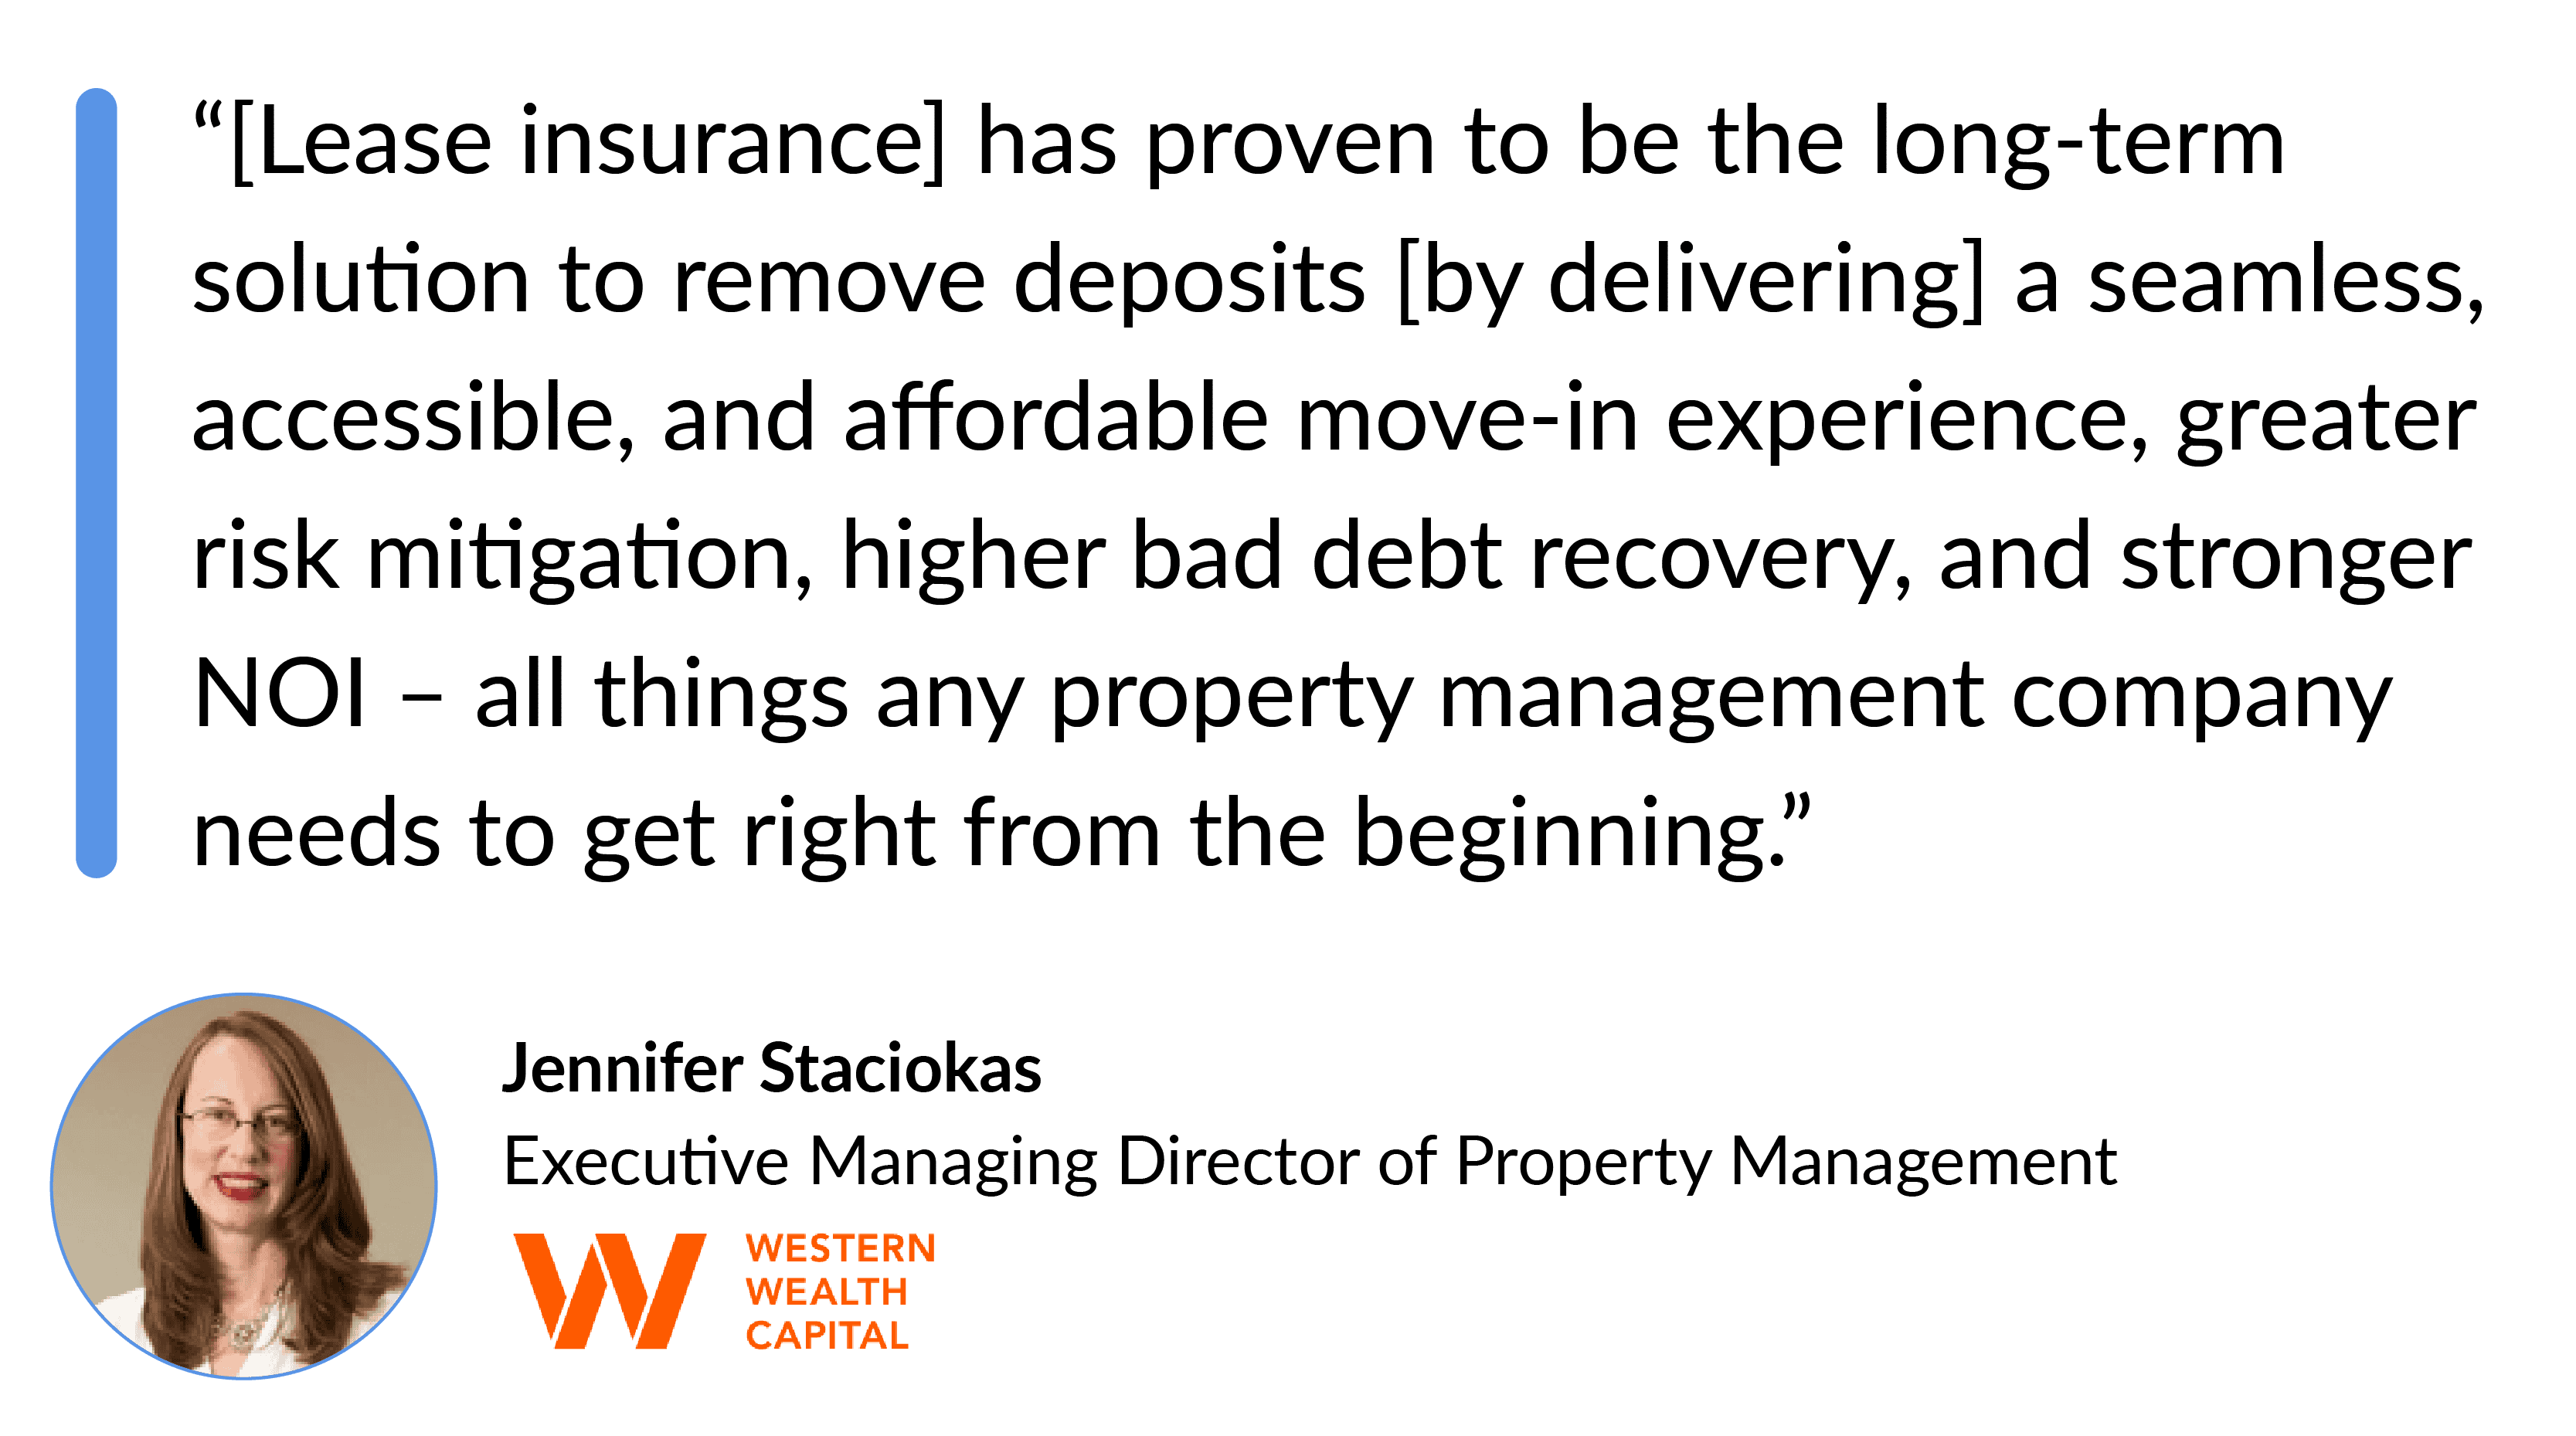 Multifamily Shift to Smarter Loss Protection-Jennifer Staciokas, Executive Managing Director of Property Management for Western Wealth Capital